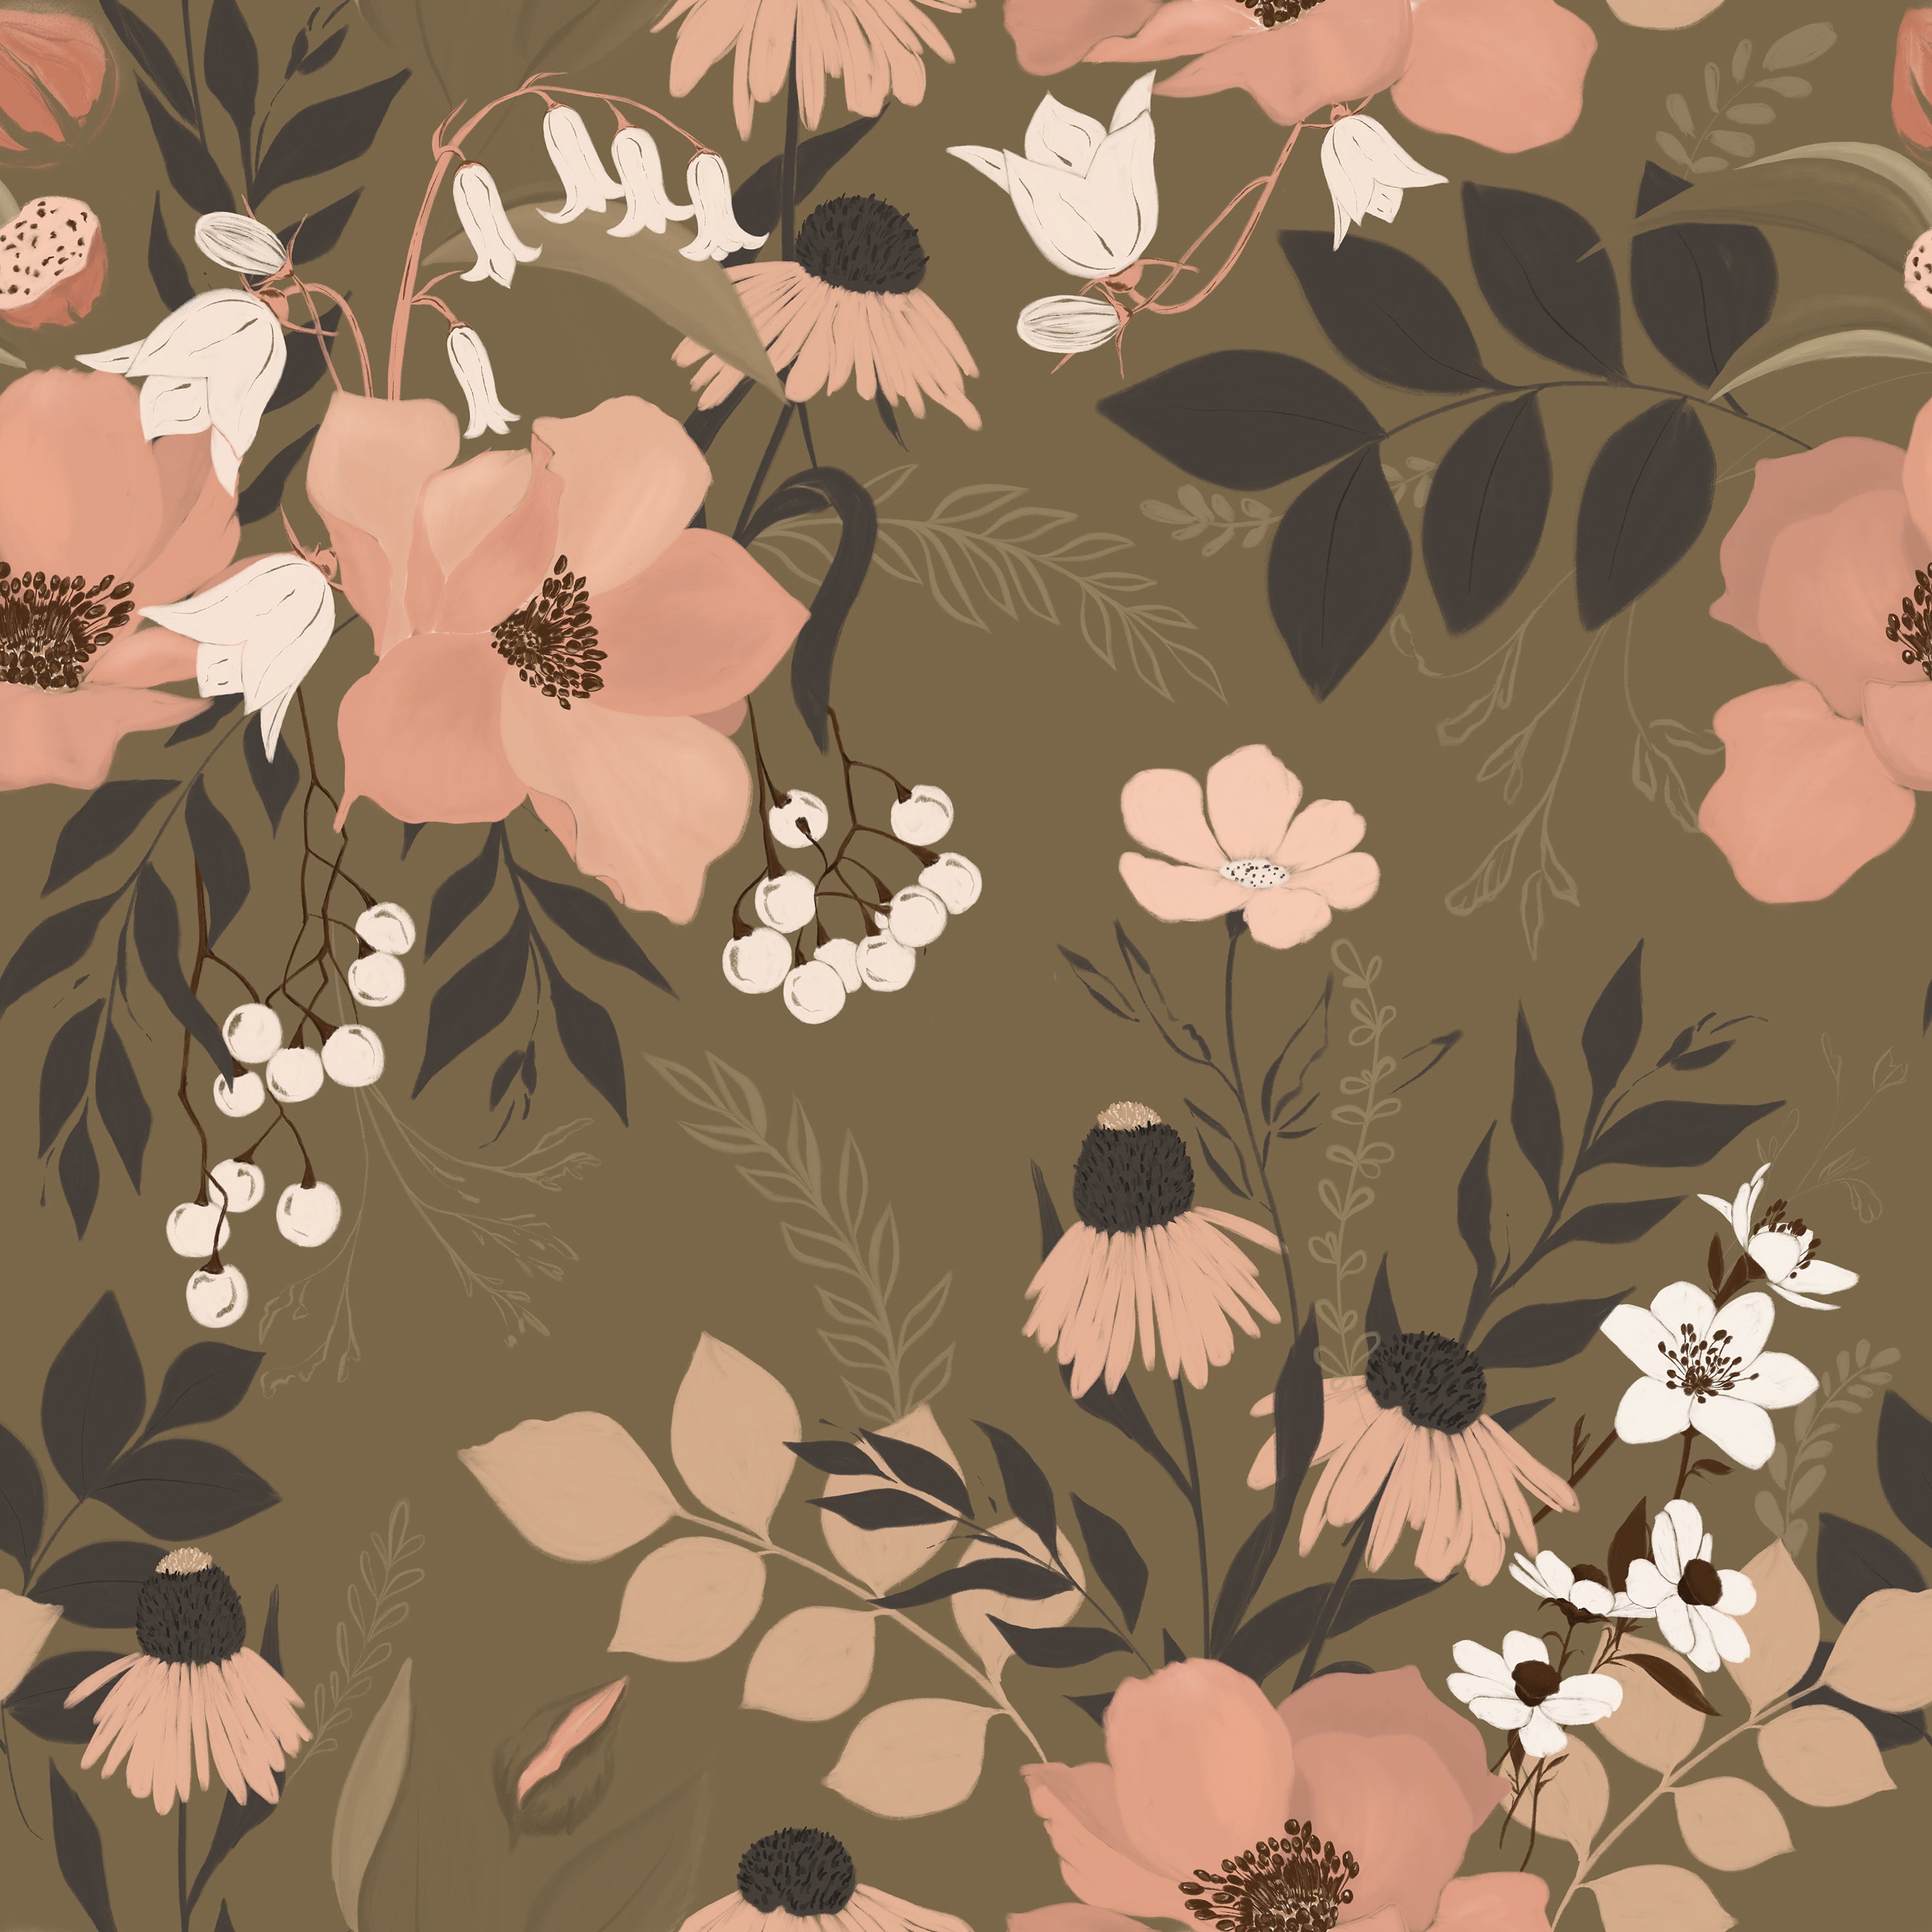 A detailed view of the Botanic Garden Wallpaper, showcasing an array of floral illustrations against a muted olive background. The design features large peach blossoms, delicate white flowers, and intricate foliage that adds a lush, botanical feel to any space.